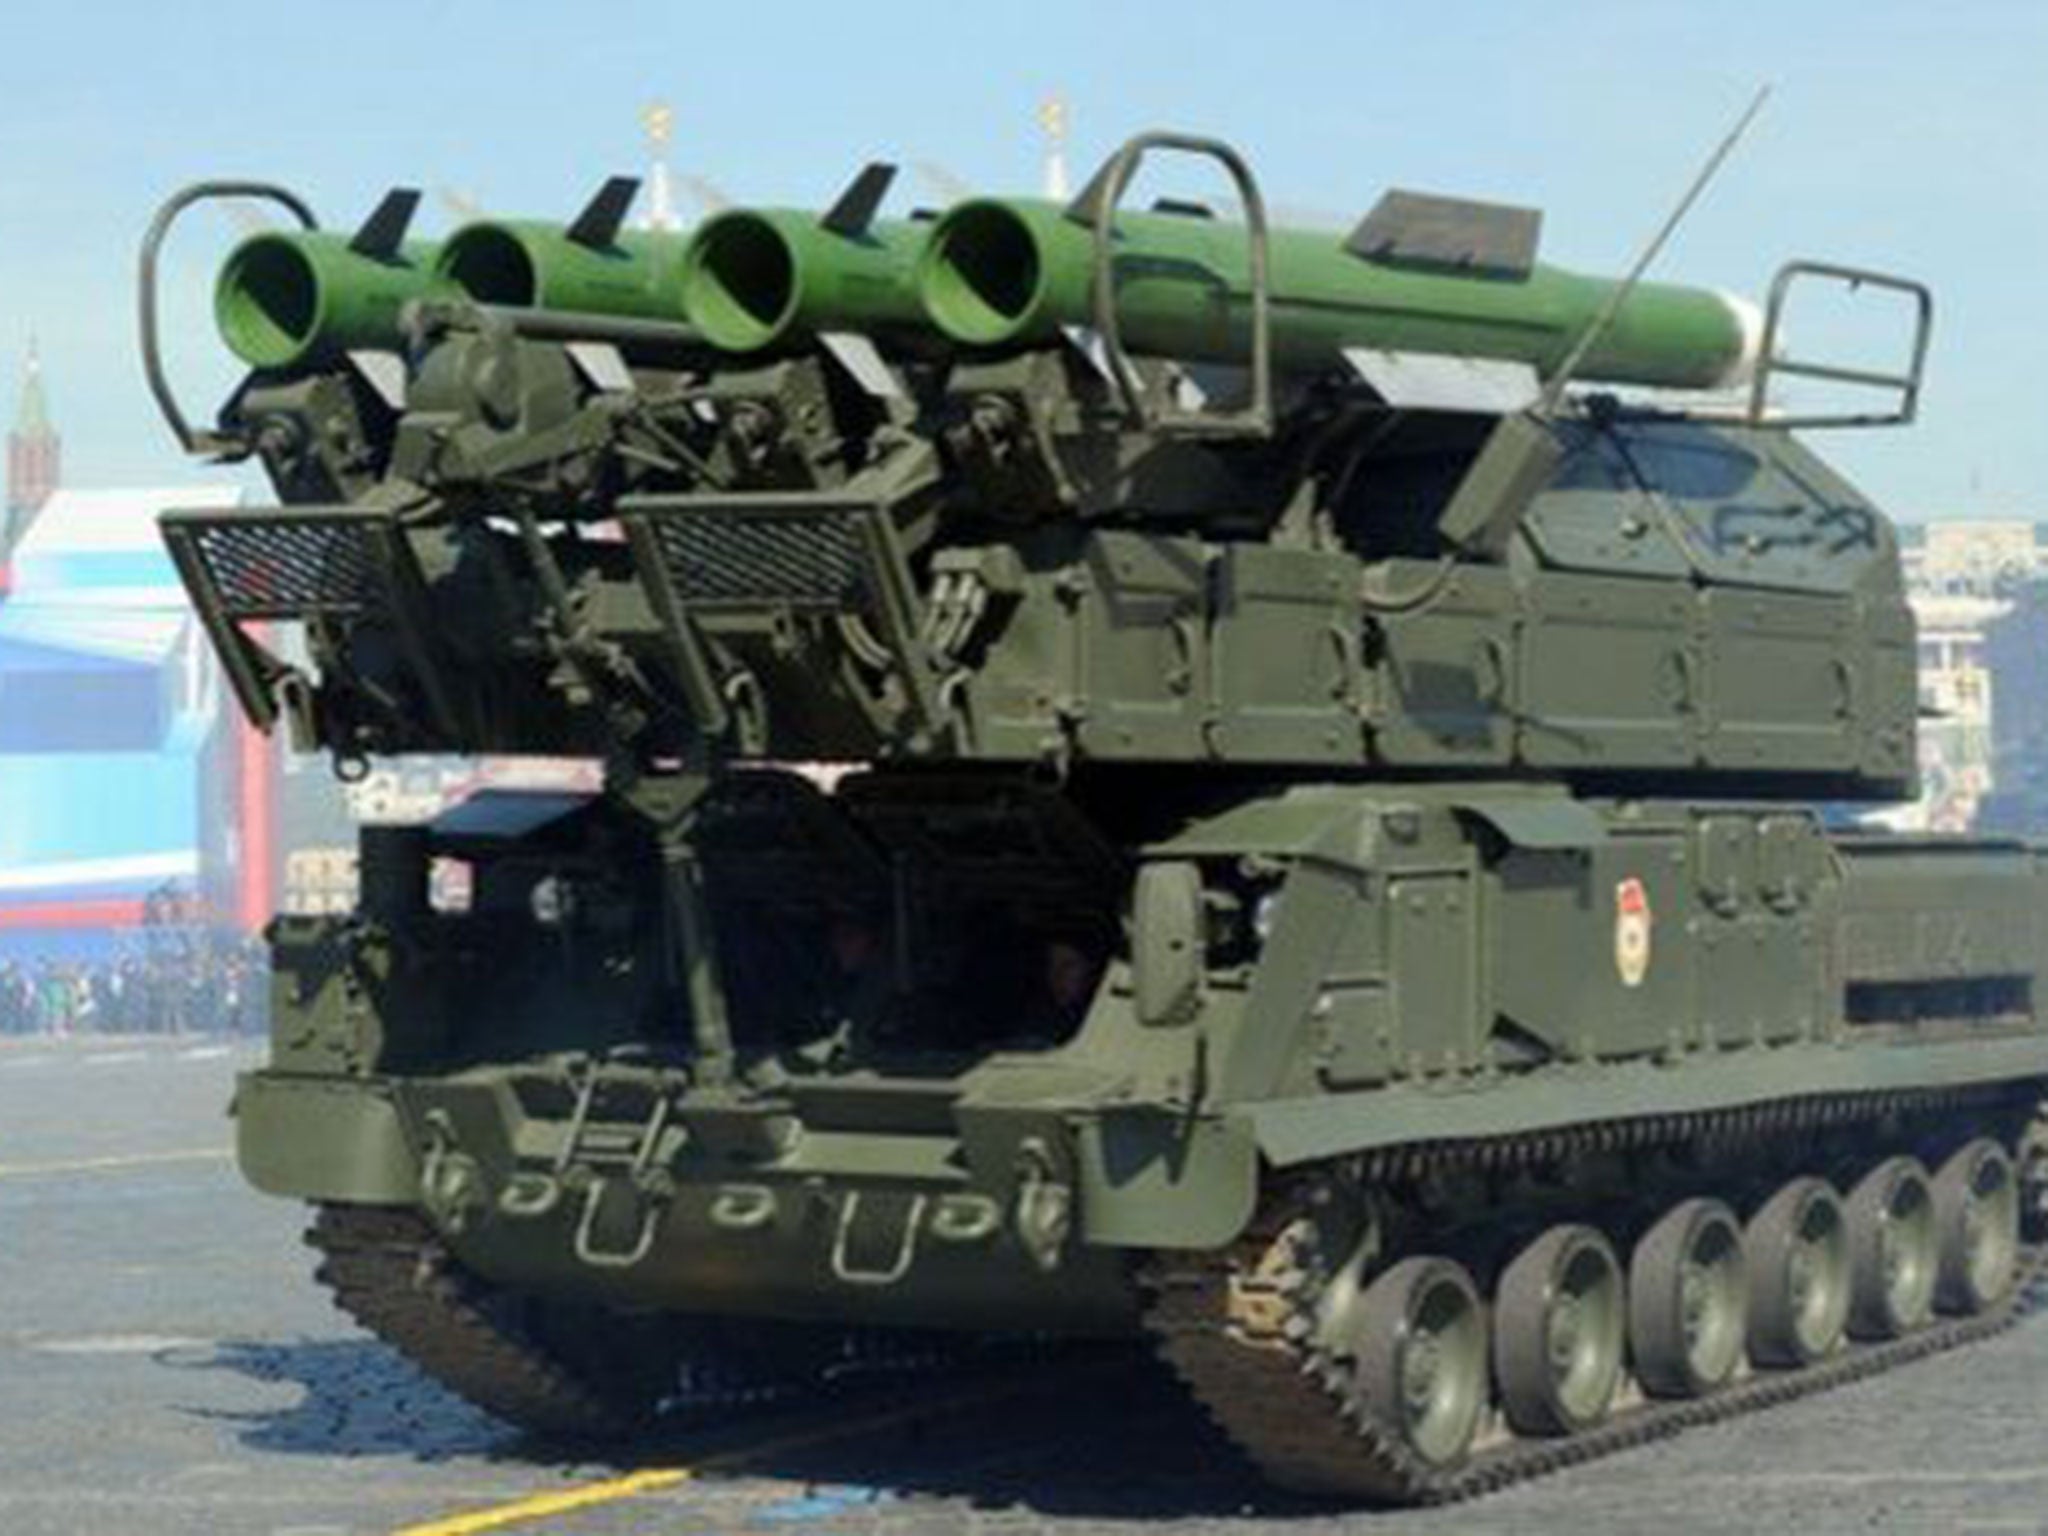 One of the vehicles that can fire Buk missiles